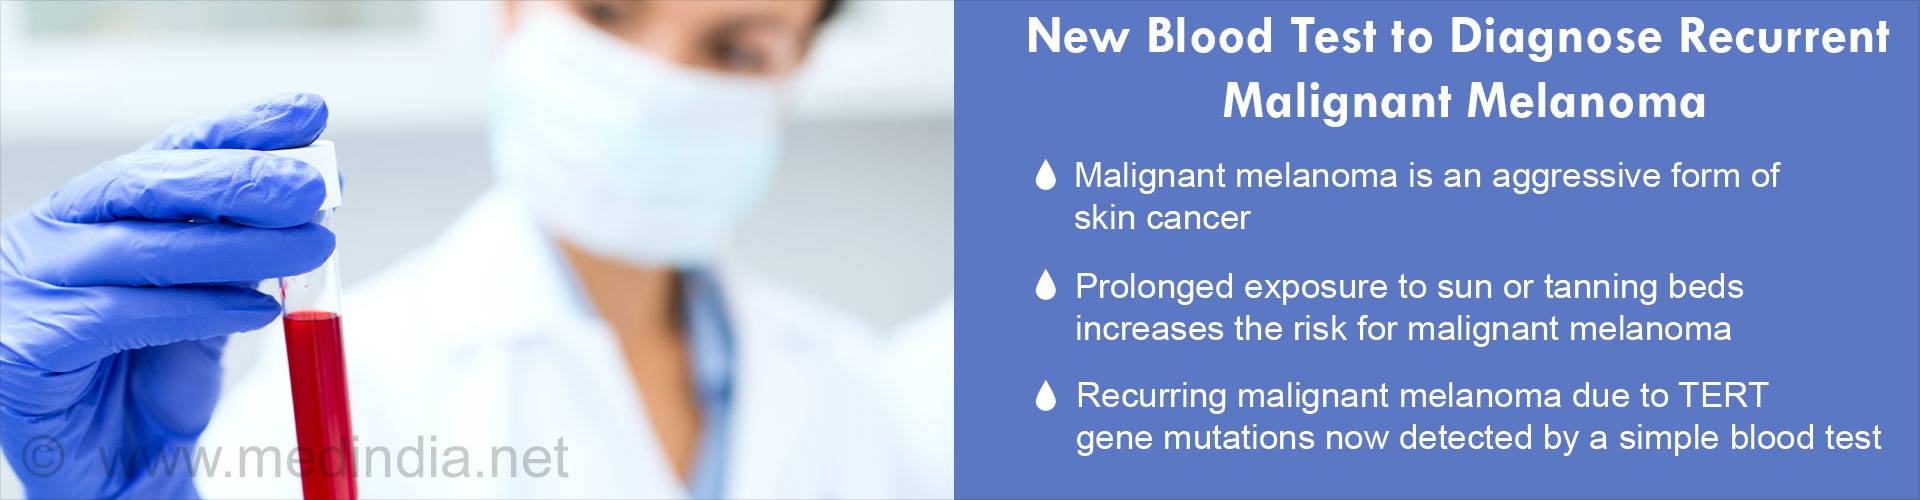 New Blood Test to Diagnose Recurrent Malignant Melanoma
- Malignant melanoma is an aggressive form of skin cancer
- Prolonged exposure to sun or tanning beds increases the risk for malignant melanoma
- Recurring malignant melanoma due to TERT gene mutatuions now detected by a simple blood test